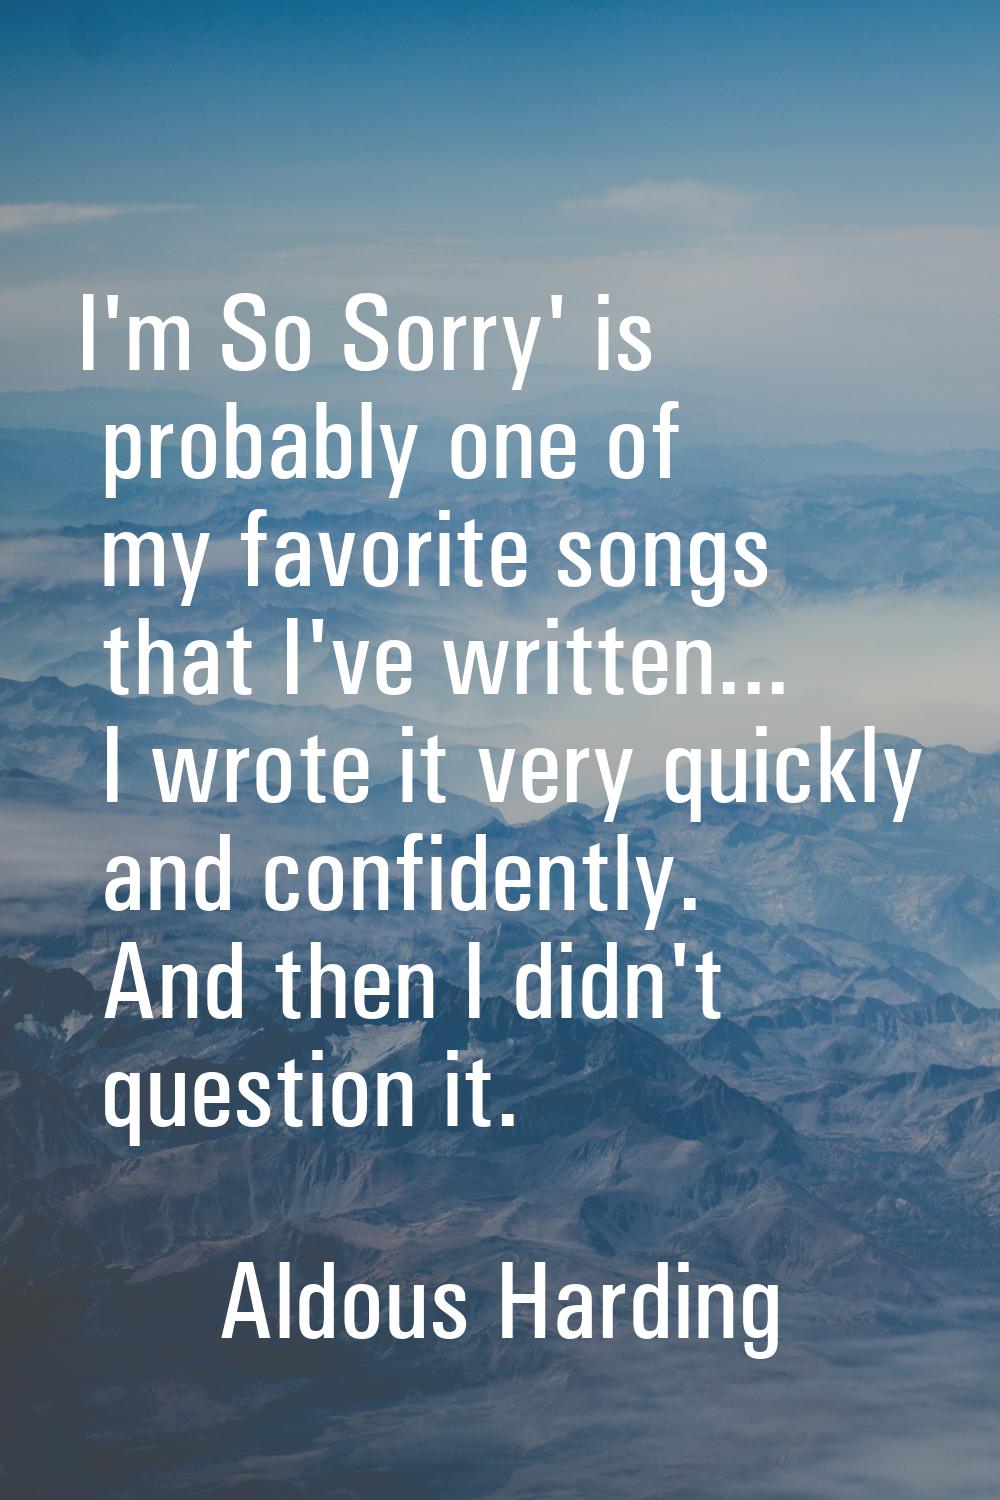 I'm So Sorry' is probably one of my favorite songs that I've written... I wrote it very quickly and